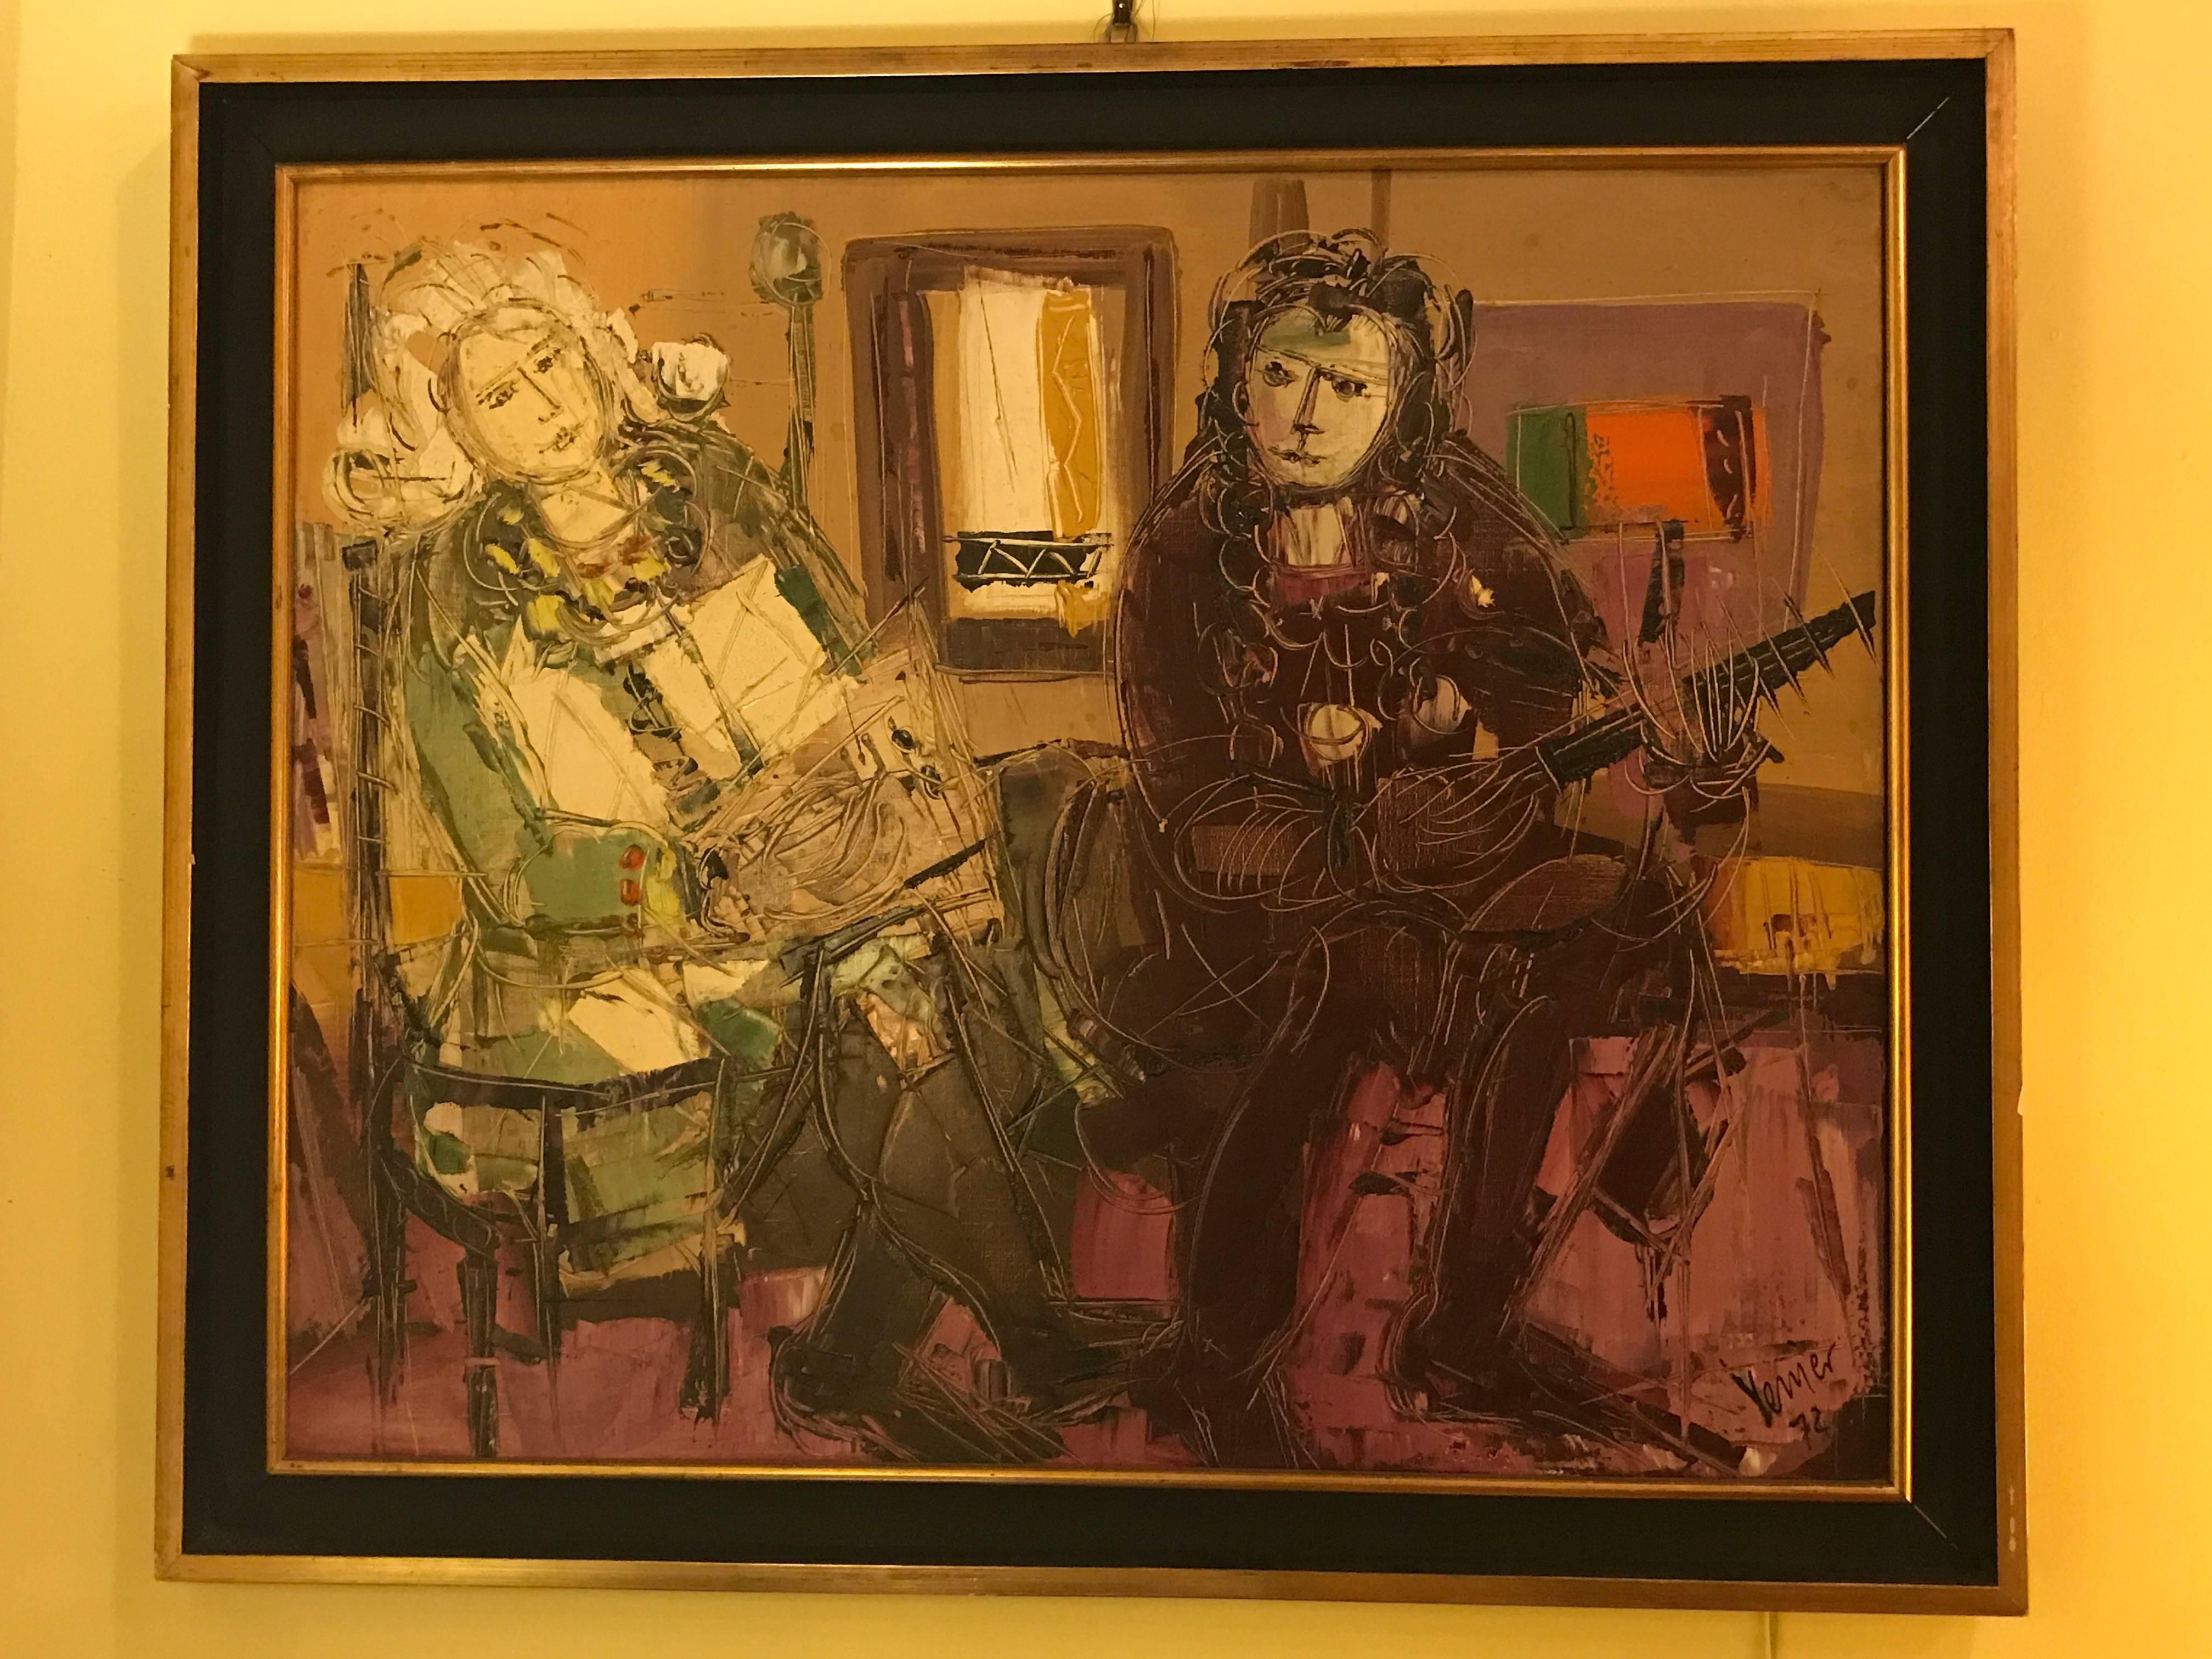 Signed and dated large oil on canvas framed. An indistinctively signed oil on canvas of a man and a woman playing musical instruments. Framed in an ebony frame flanked by gilt borders this highly decorative oil on canvas is wonderfully painted and